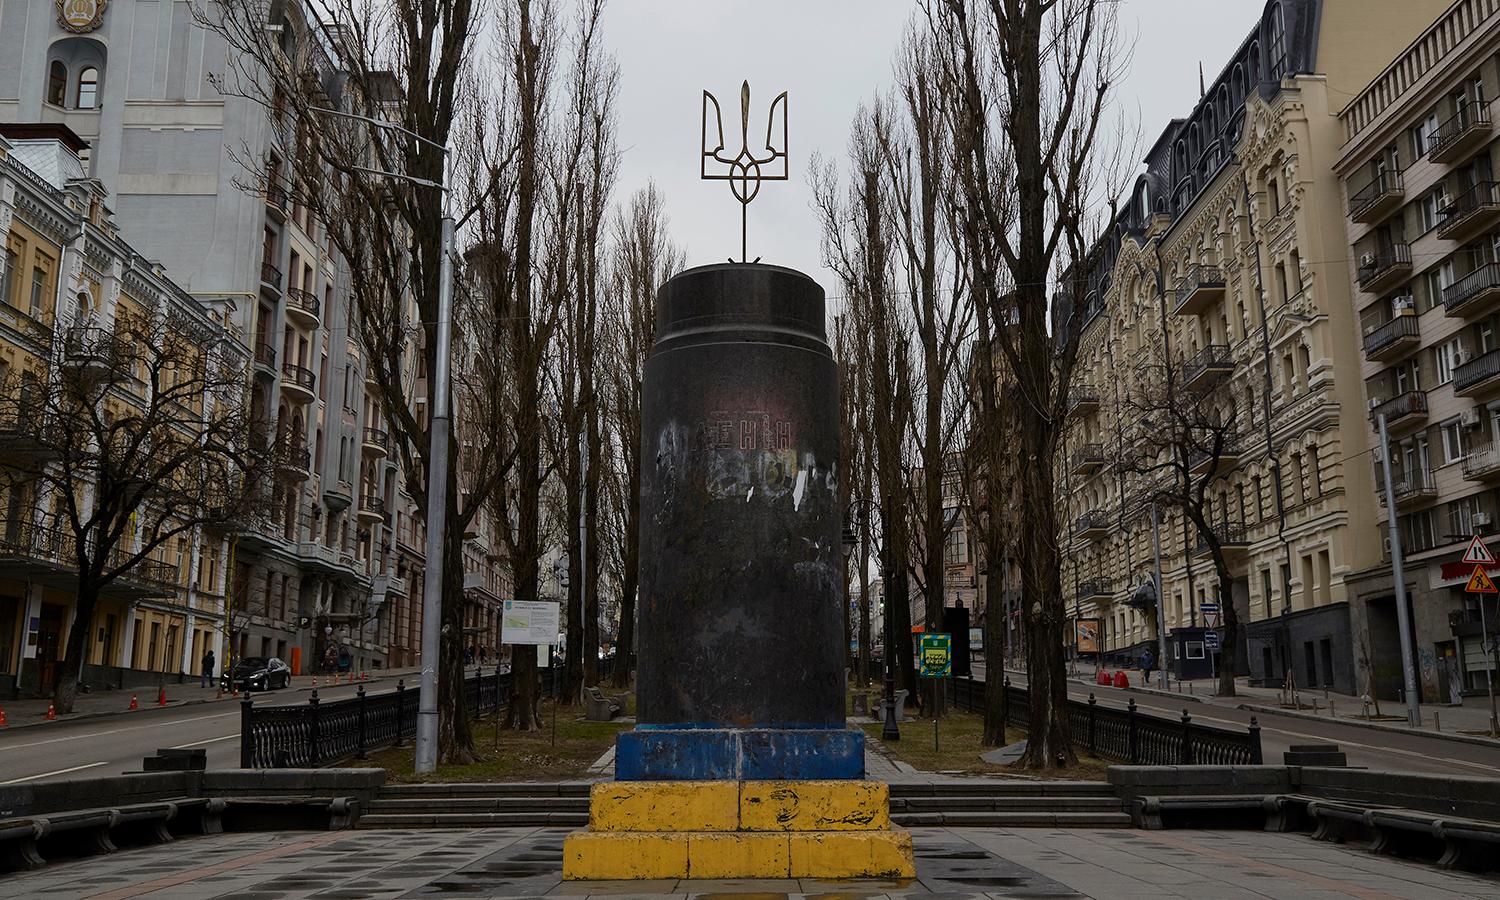 Symantec researchers say ransomware may have been used as a decoy to deploy new wiper malware ahead of Russia&#8217;s invasion of Ukraine. Pictured: The Ukrainian trident is seen where a Lenin statue once stood in Kyiv, Ukraine, on Feb. 24, 2022. (Photo by Pierre Crom/Getty Images)